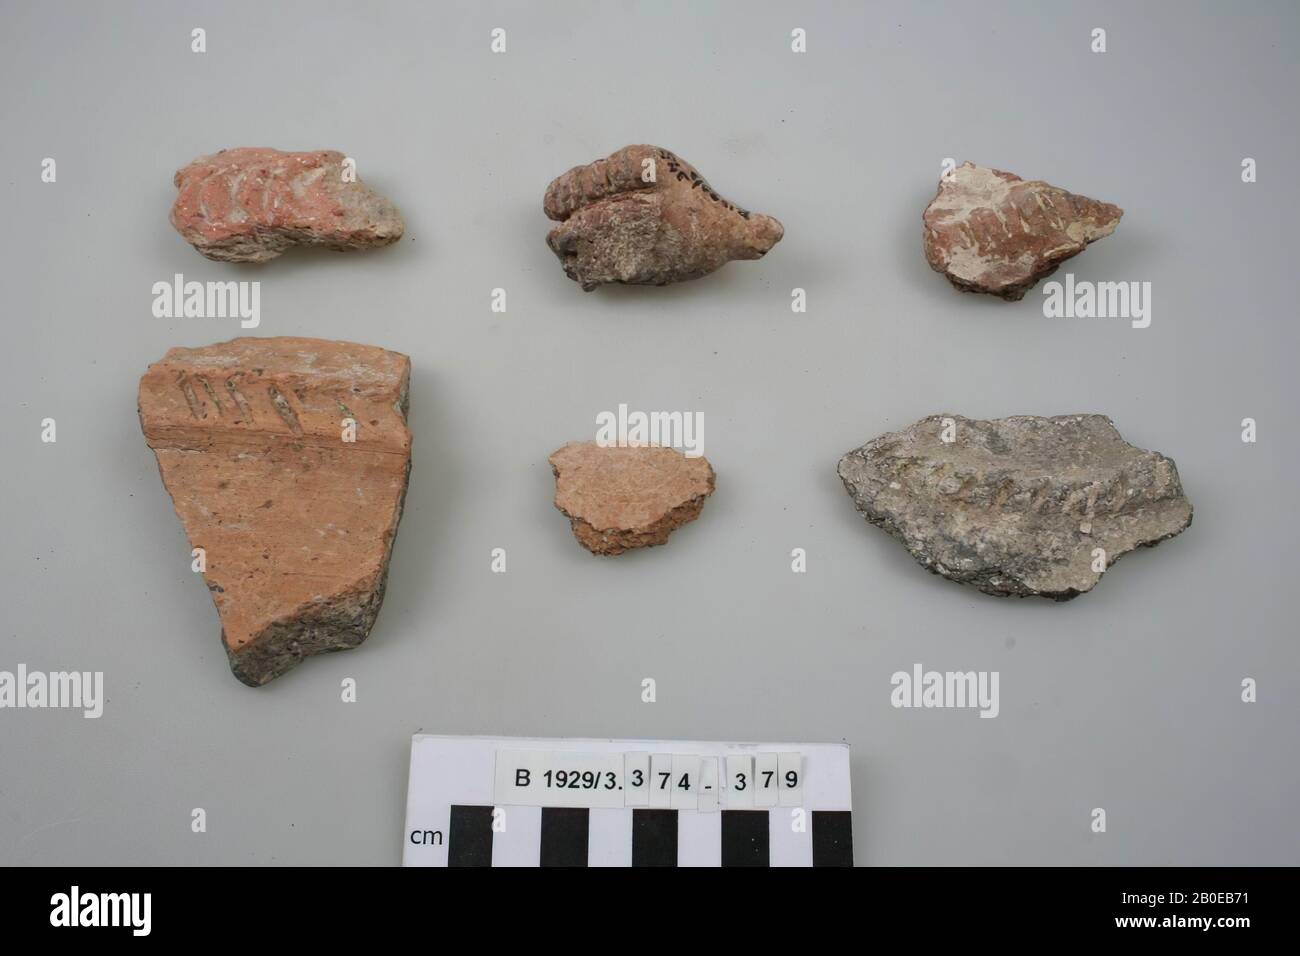 a wall shard, tableware, earthenware, L 5.7 cm, Chalcolithic 4000-3300 BC, Palestine Stock Photo